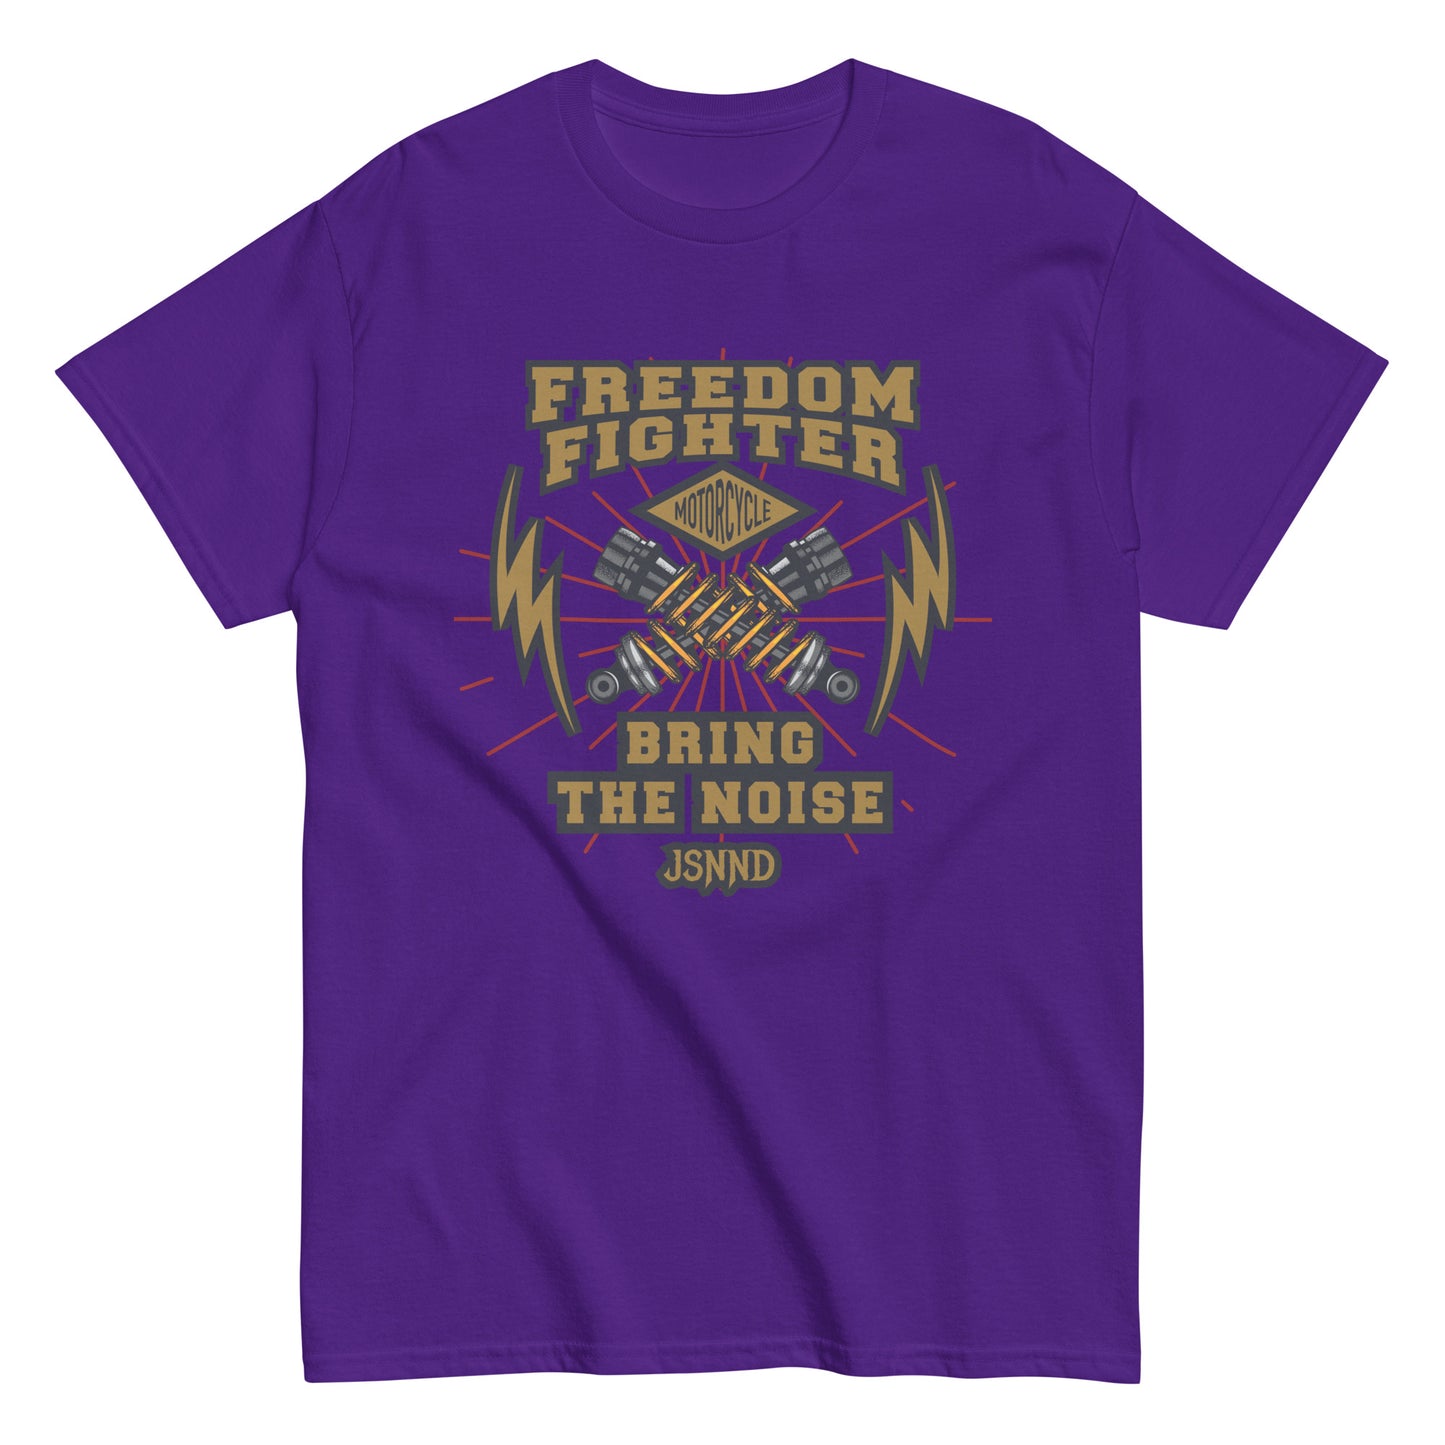 Freedom Fighter classic tee